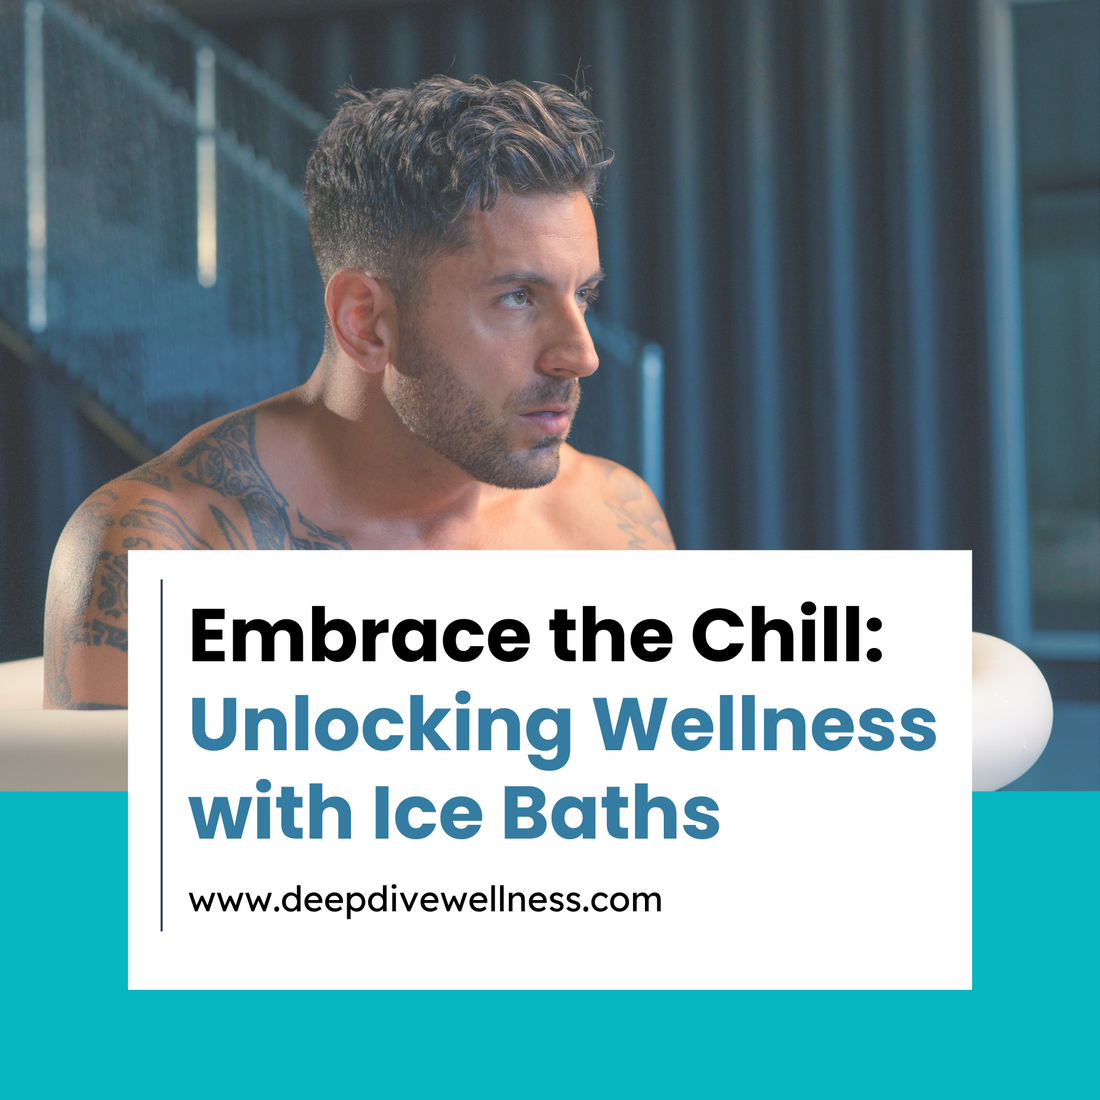 Embrace the Chill: Unlocking Wellness with Ice Baths